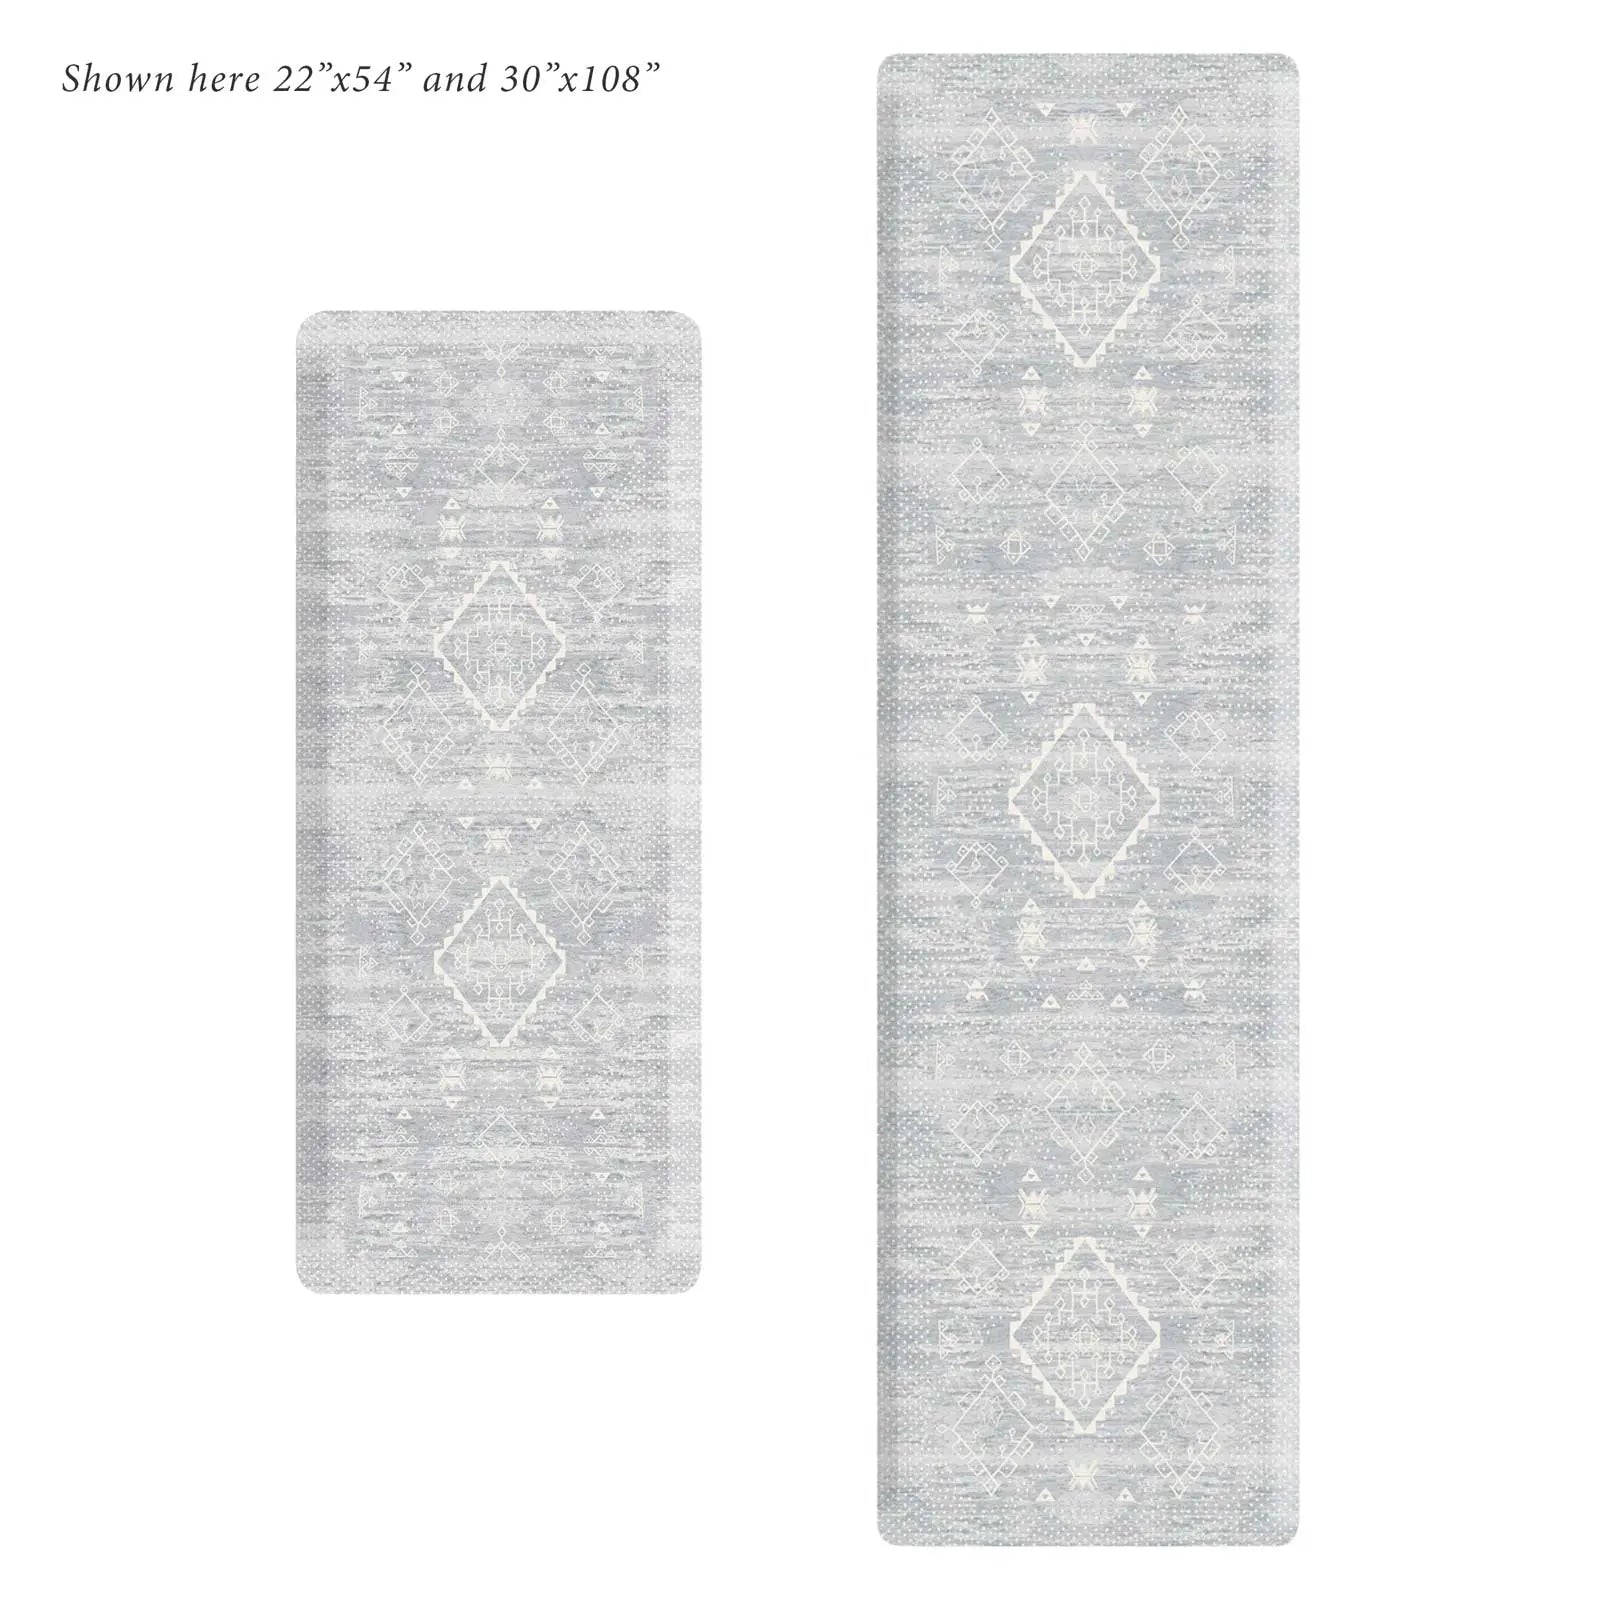 Ula gray and white Minimal Boho Pattern Standing Mat shown in sizes 22x54 and 30x108